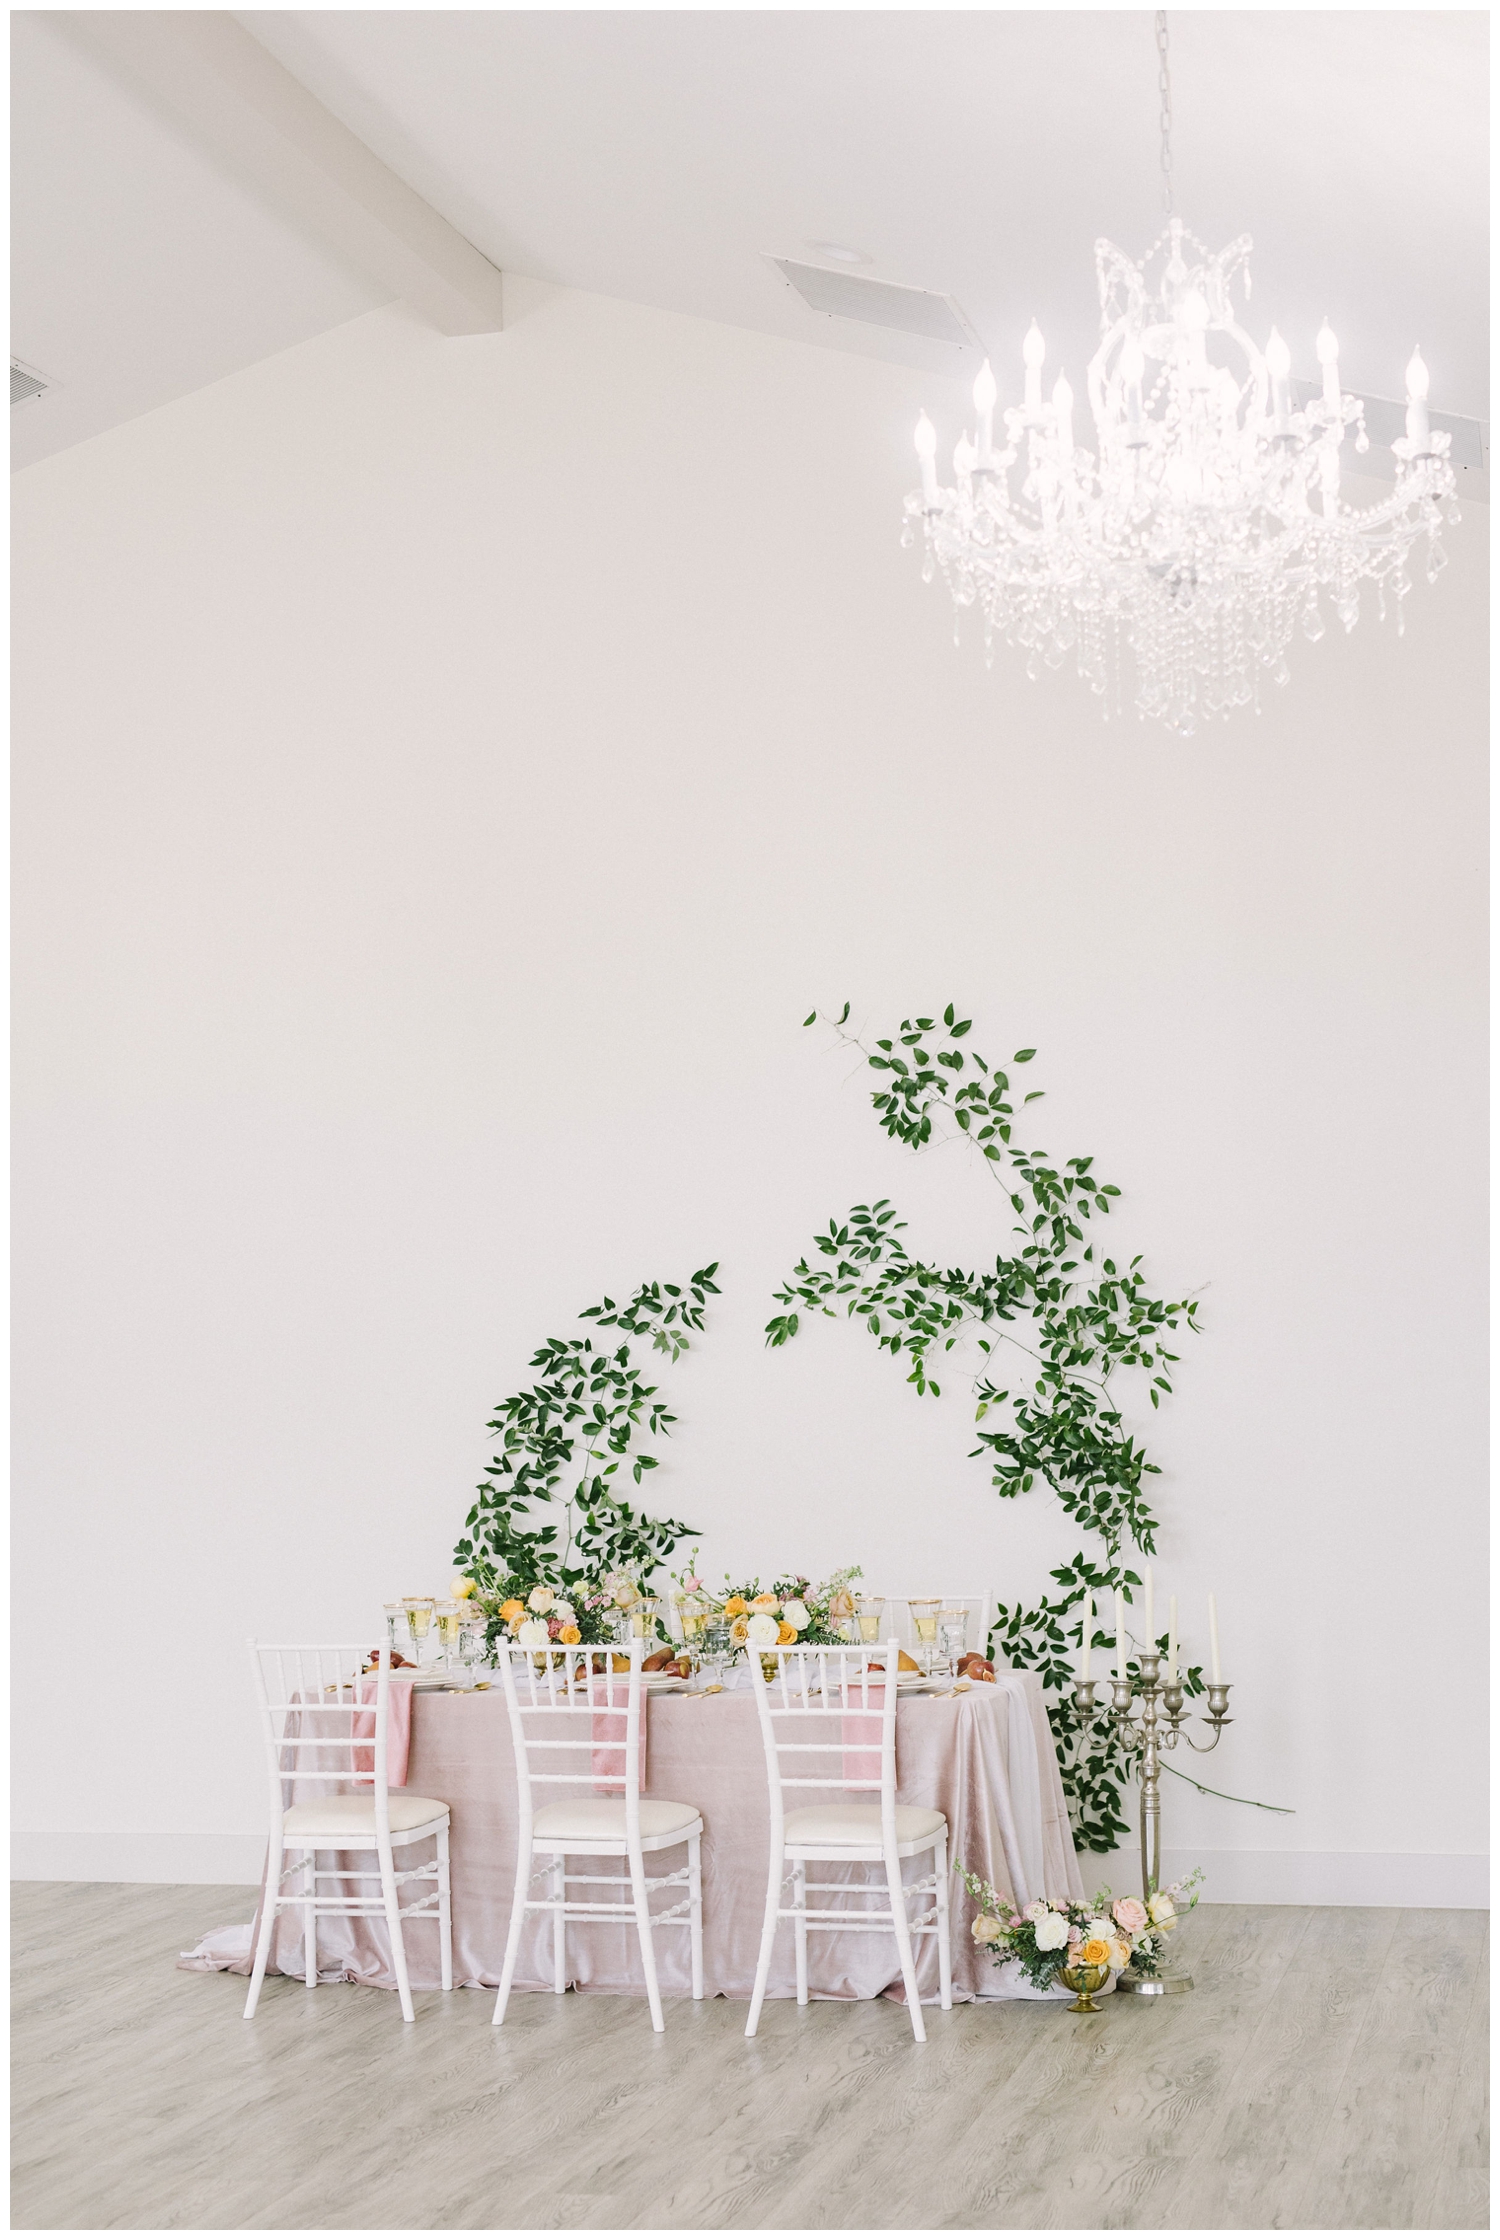 European inspired pink reception table with greenery on the wall inside Brighton Abbey wedding venue in Aubrey, Texas